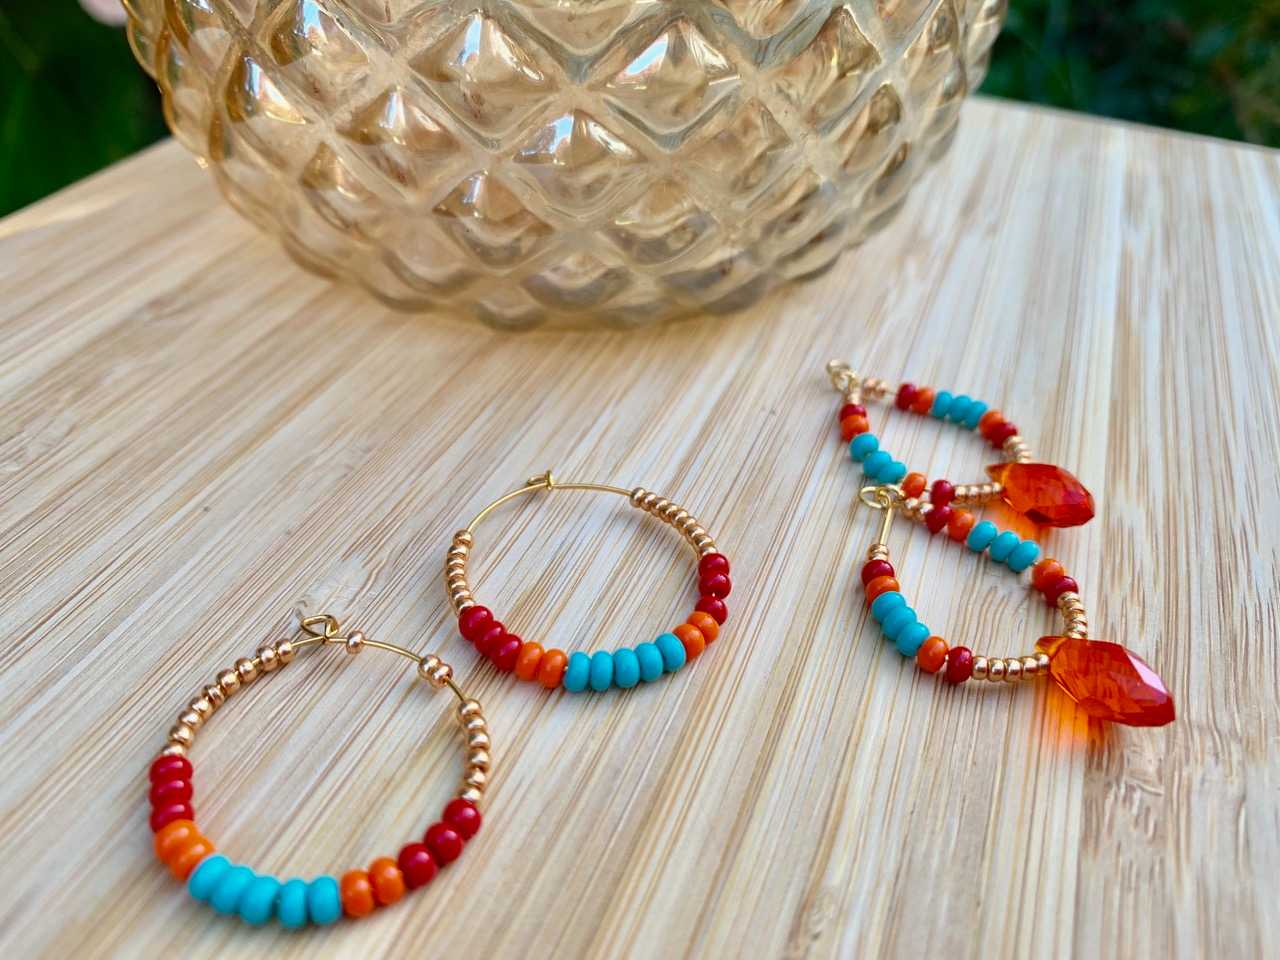 Three colorful hoop earrings on a wooden table.